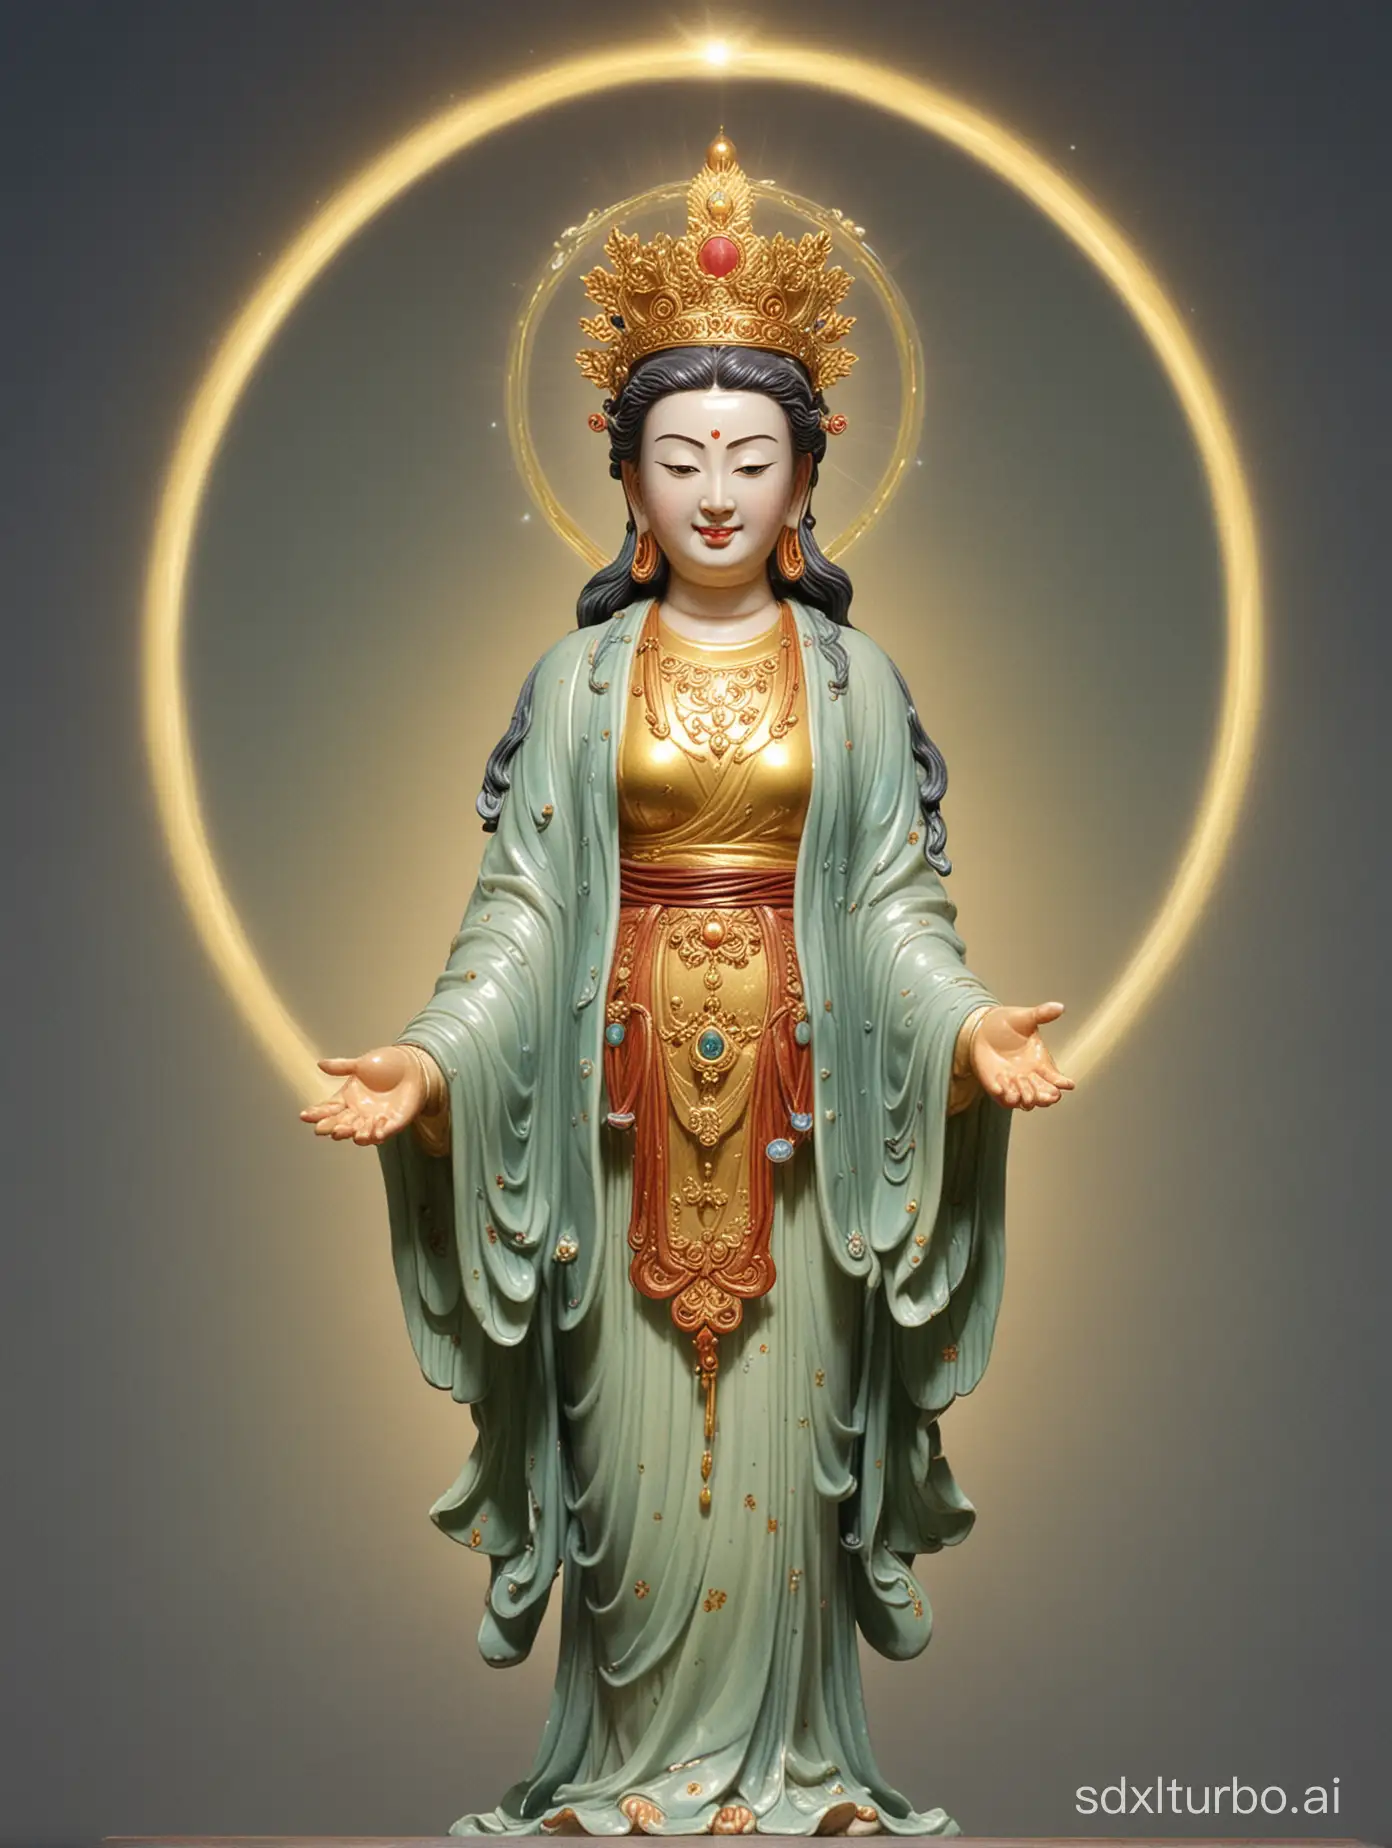 Guanyin Bodhisattva, standing, with a halo behind her head,  smiling and looking directly at the viewer.